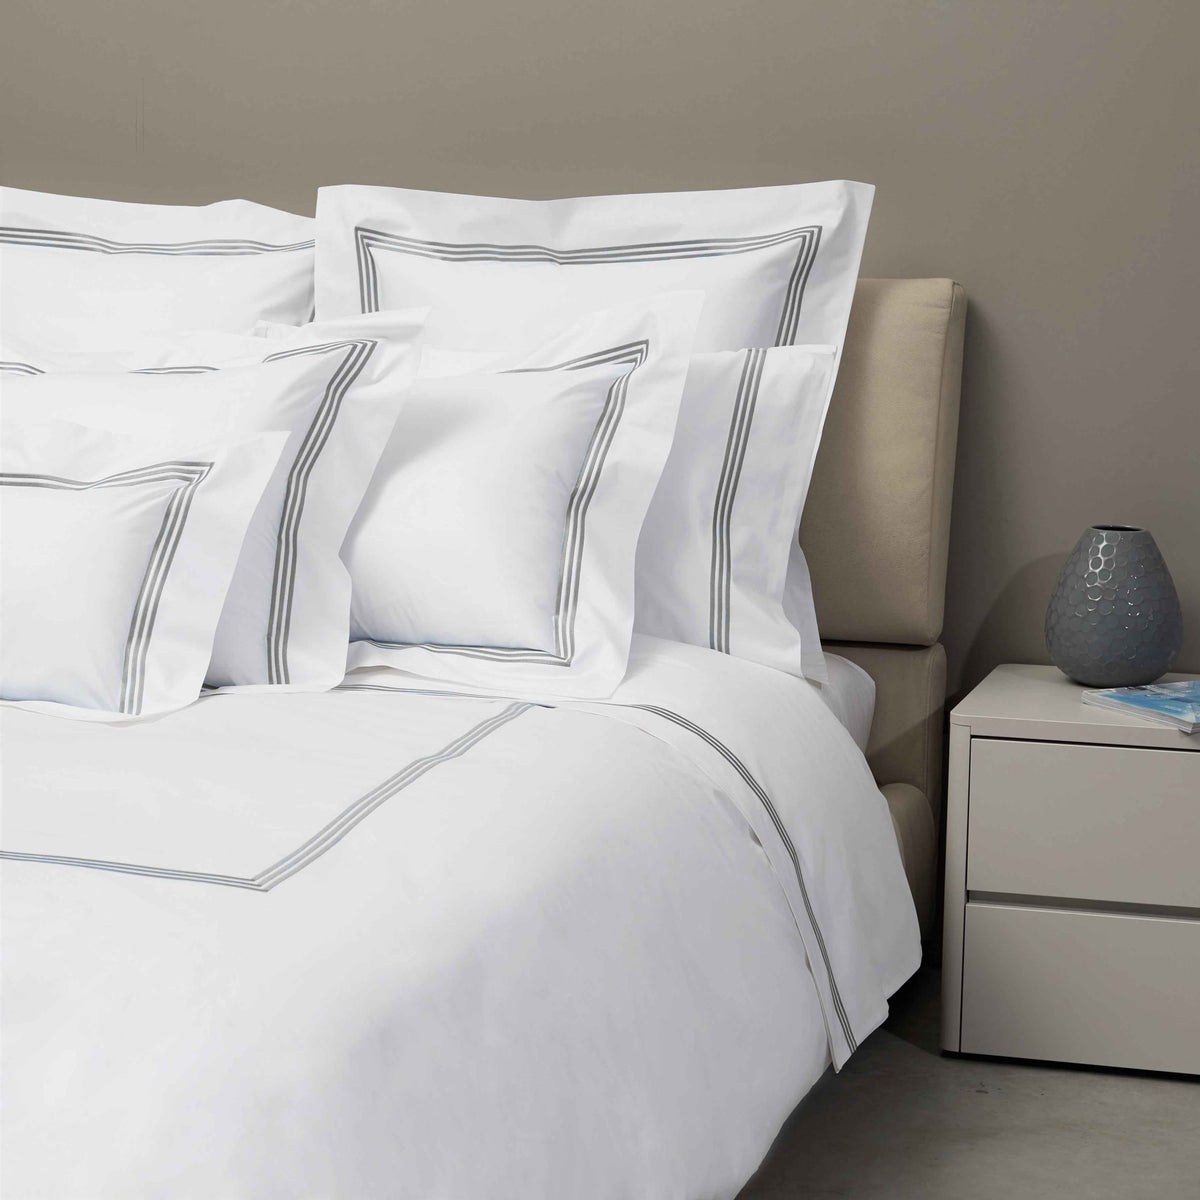 Bed Dressed in Signoria Platinum Percale Bedding in White/Silver Moon Color